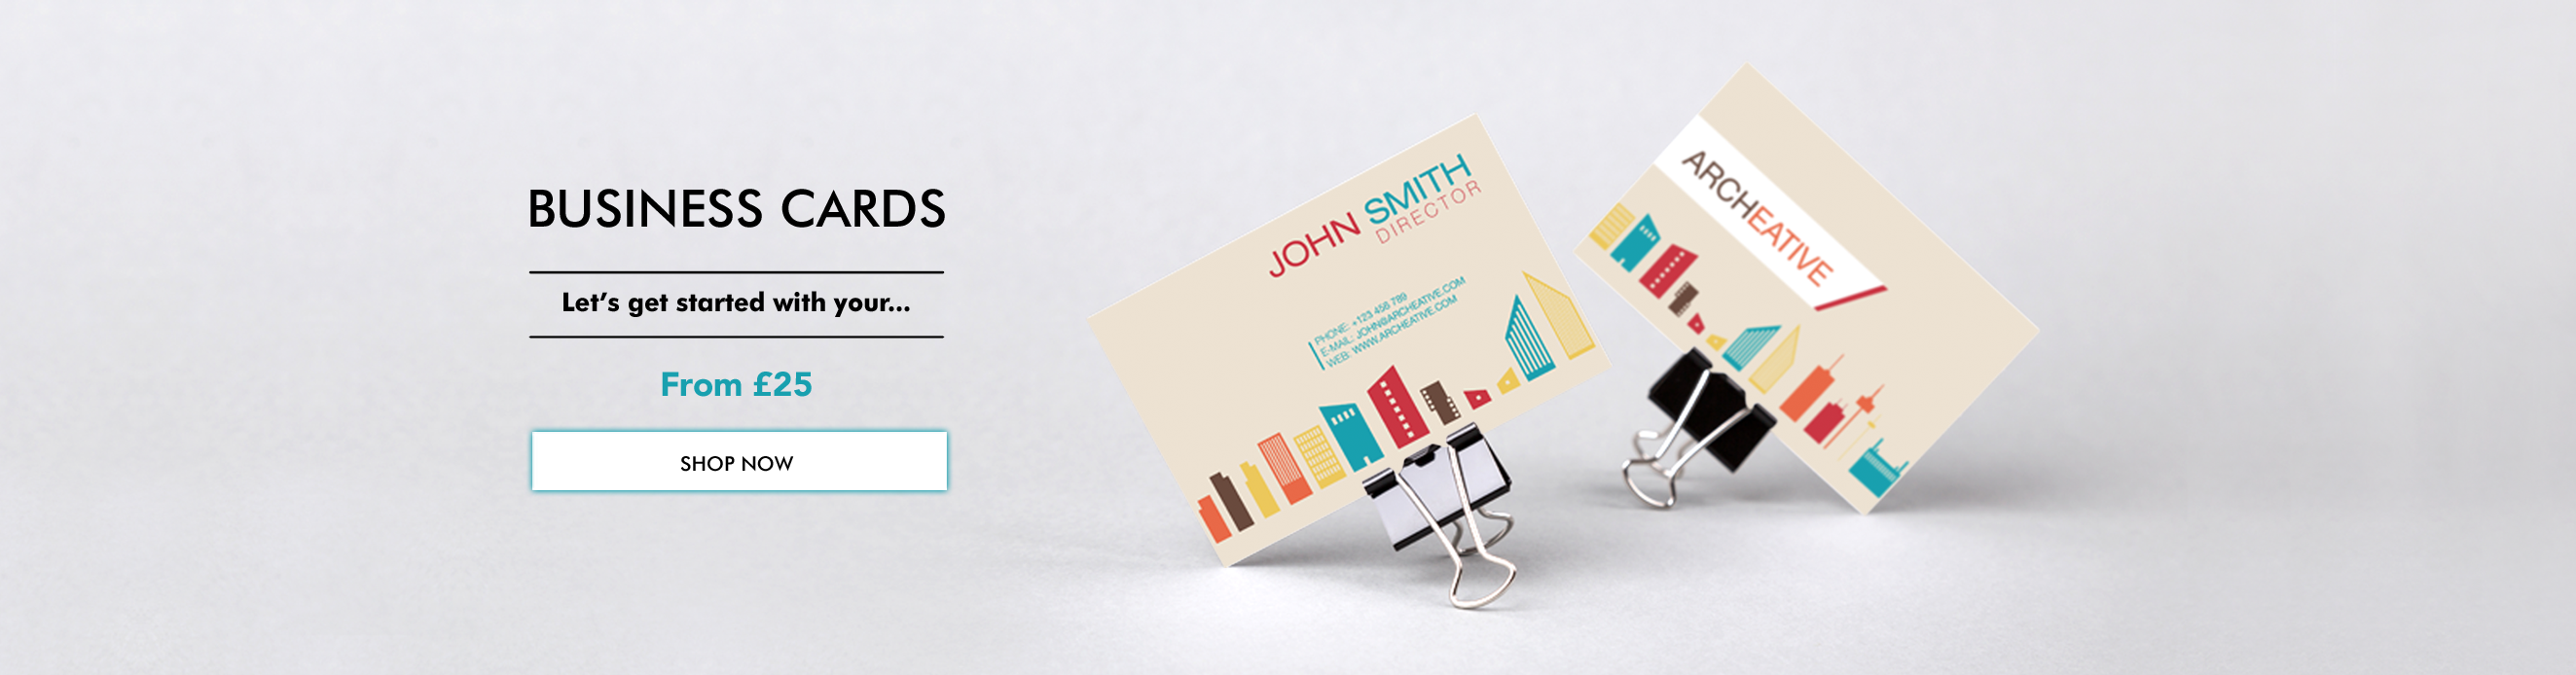 business-cards-slider-hp-london-poster-printing